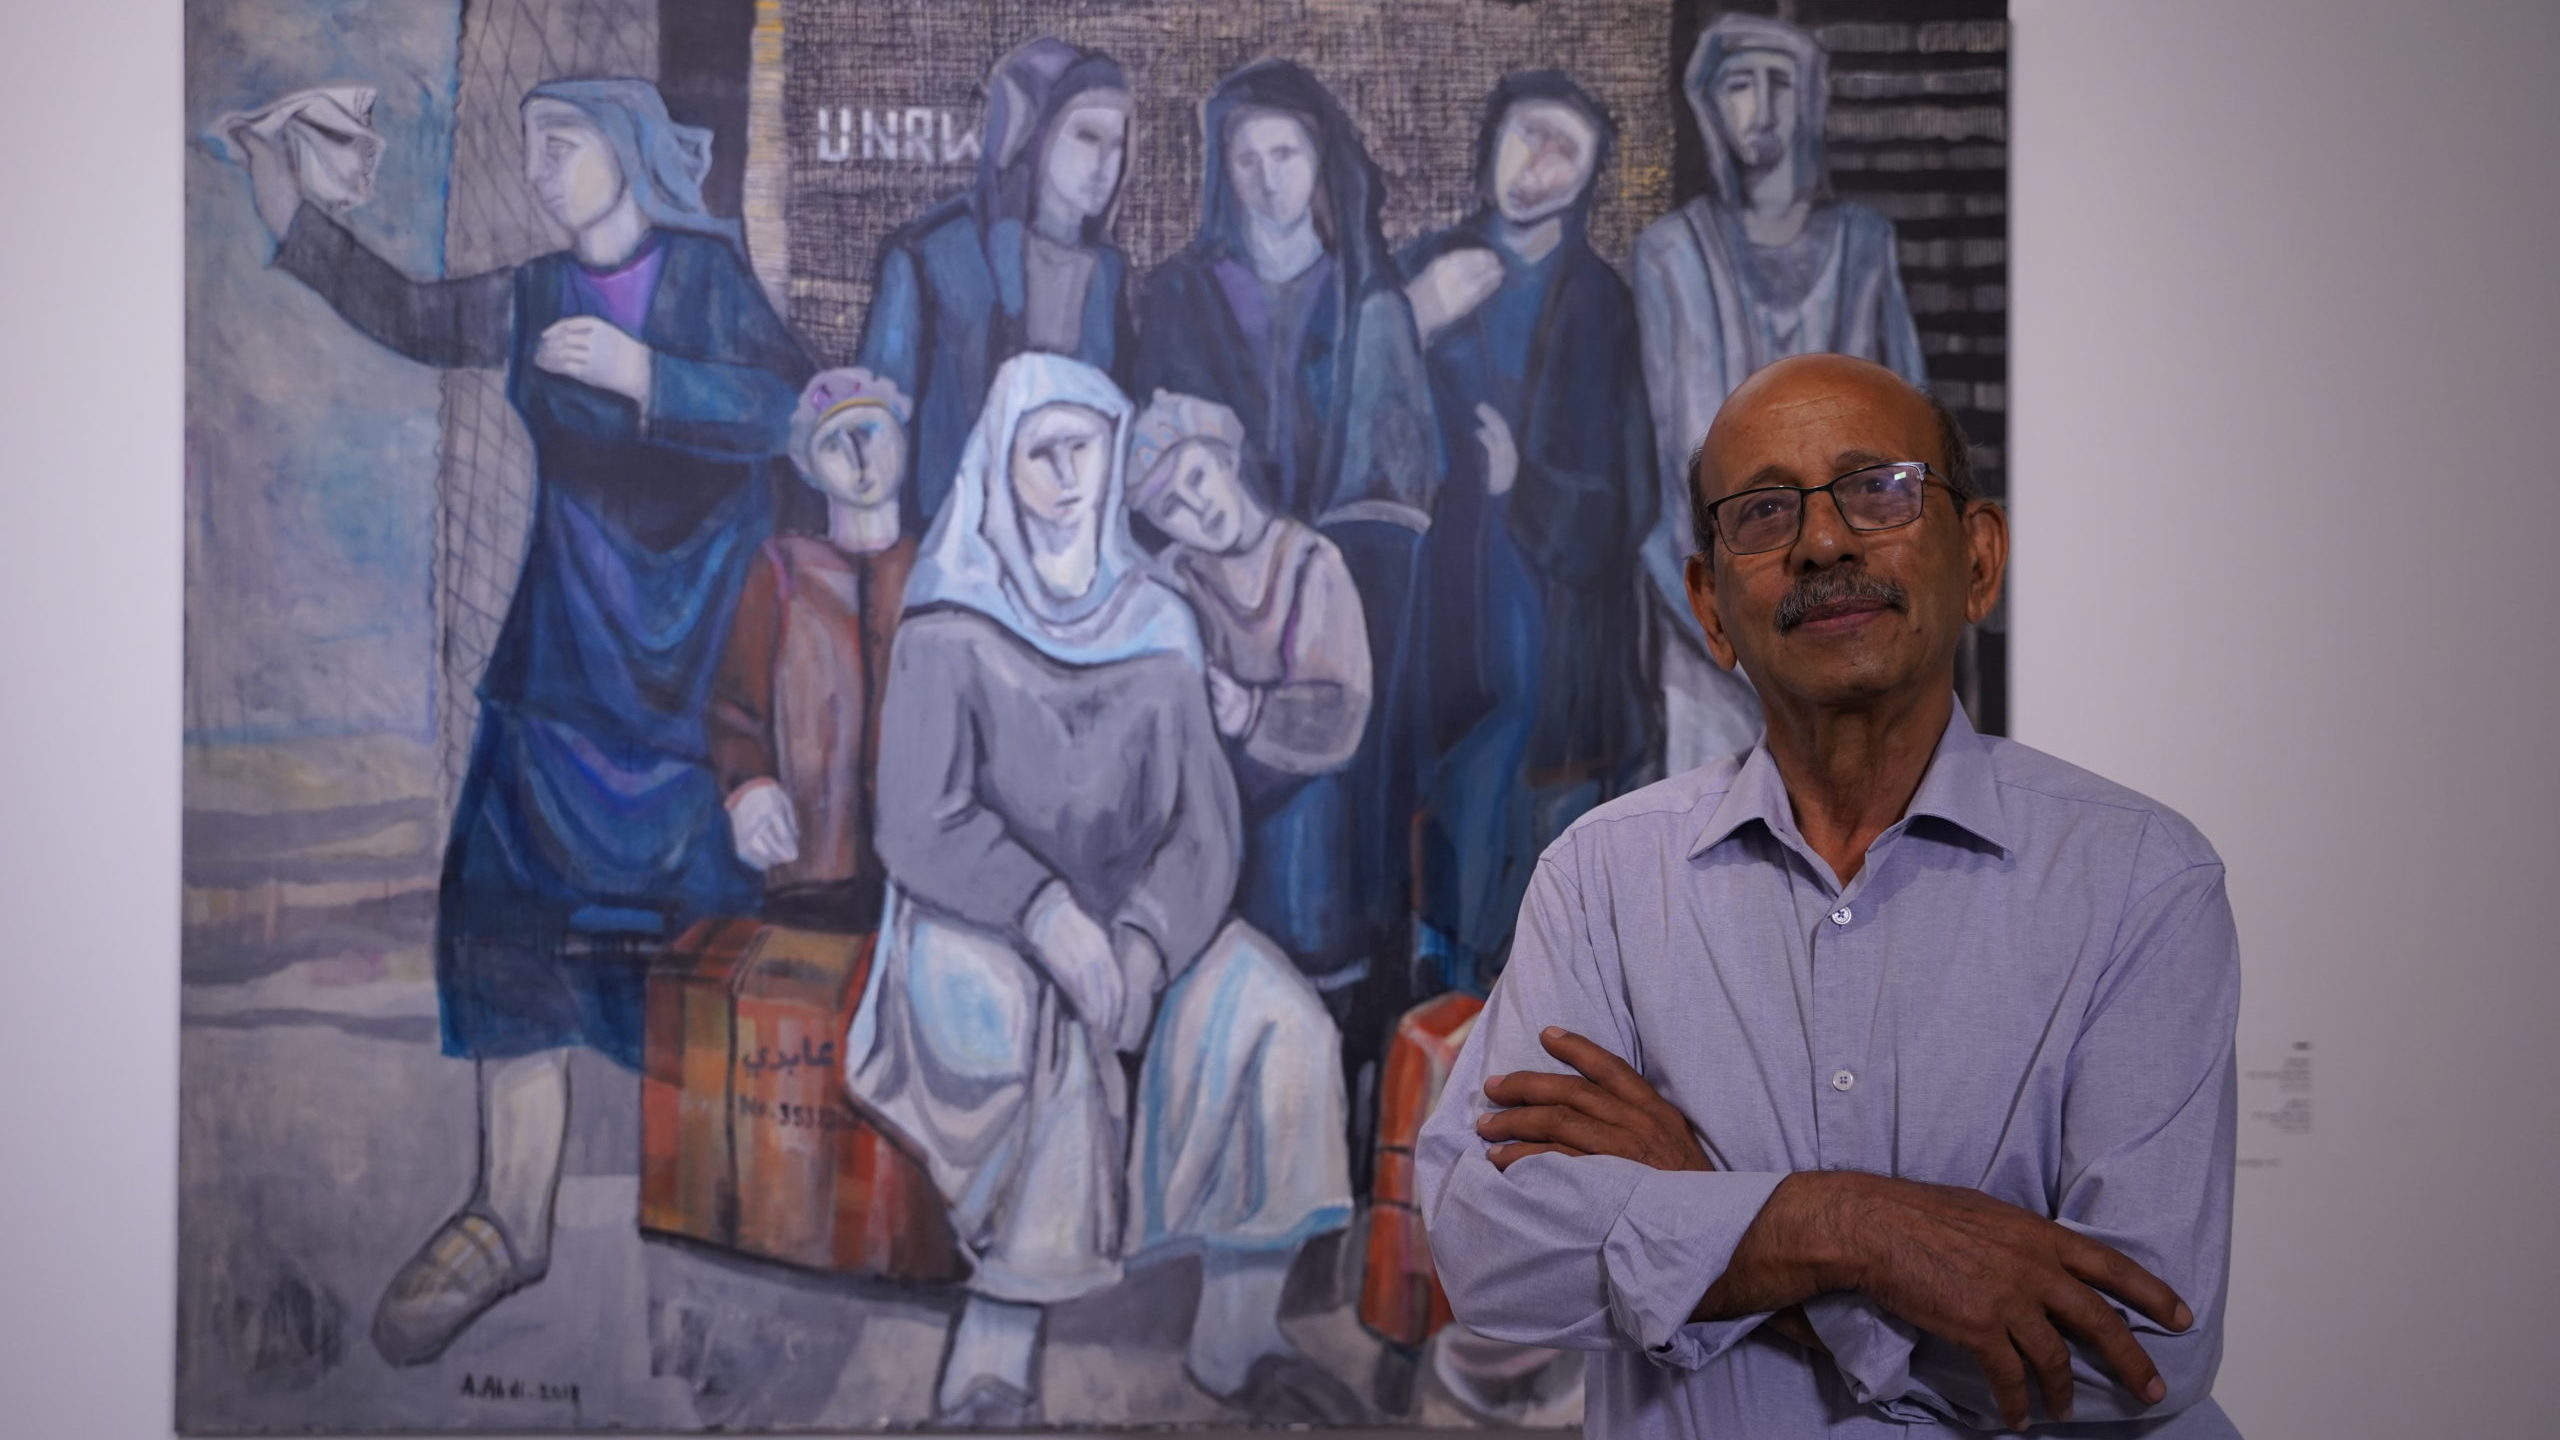 After Israel’s Jewish-Arab Unrest, Haifa Museum Opens ‘Exhibition of Healing’ (with VIDEO)